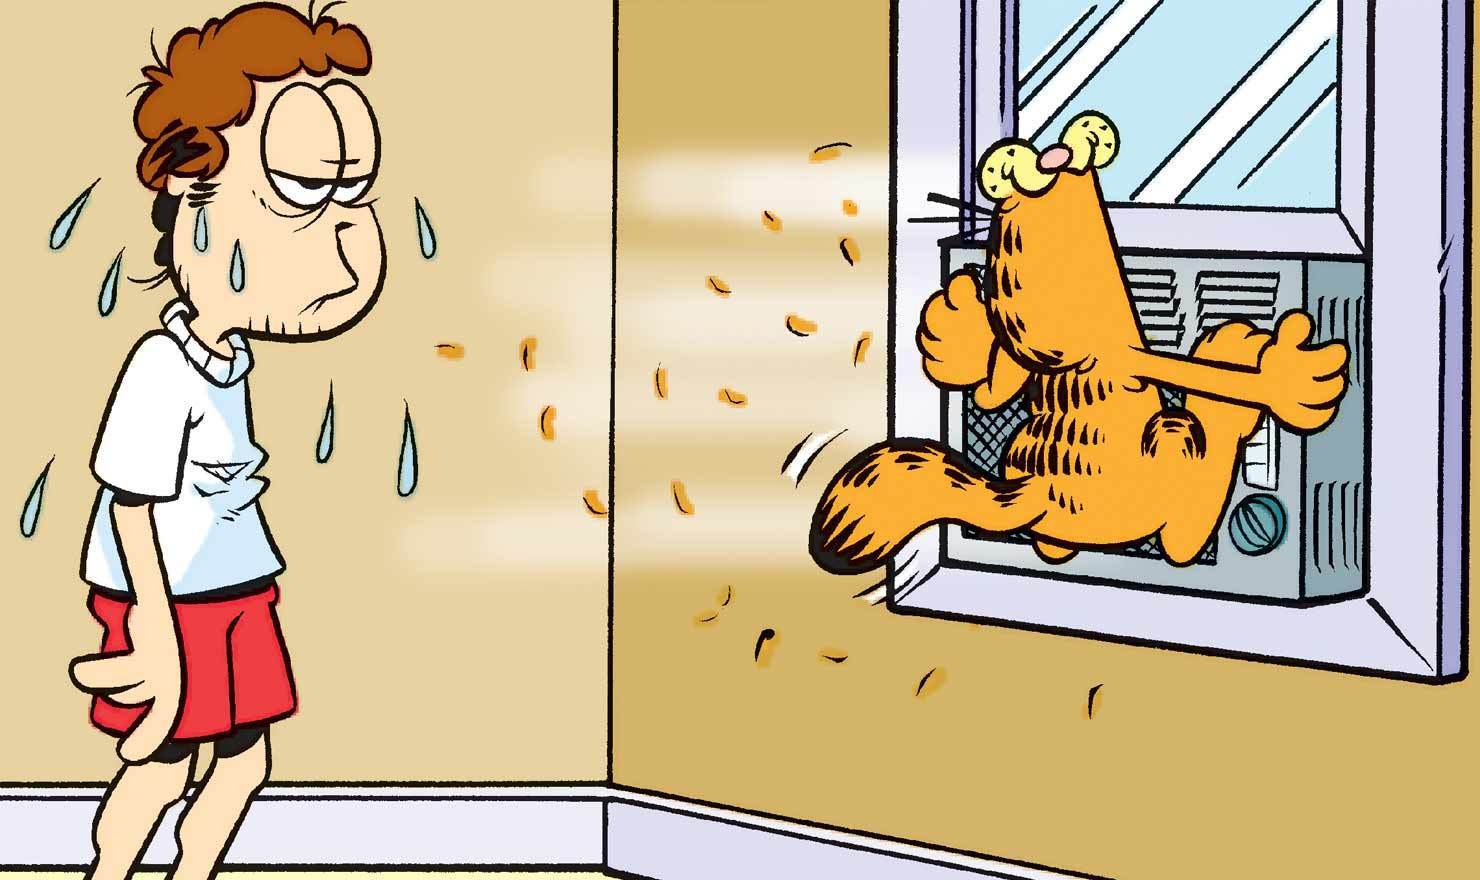 Beat The Heat With Garfield's Summertime Swagger